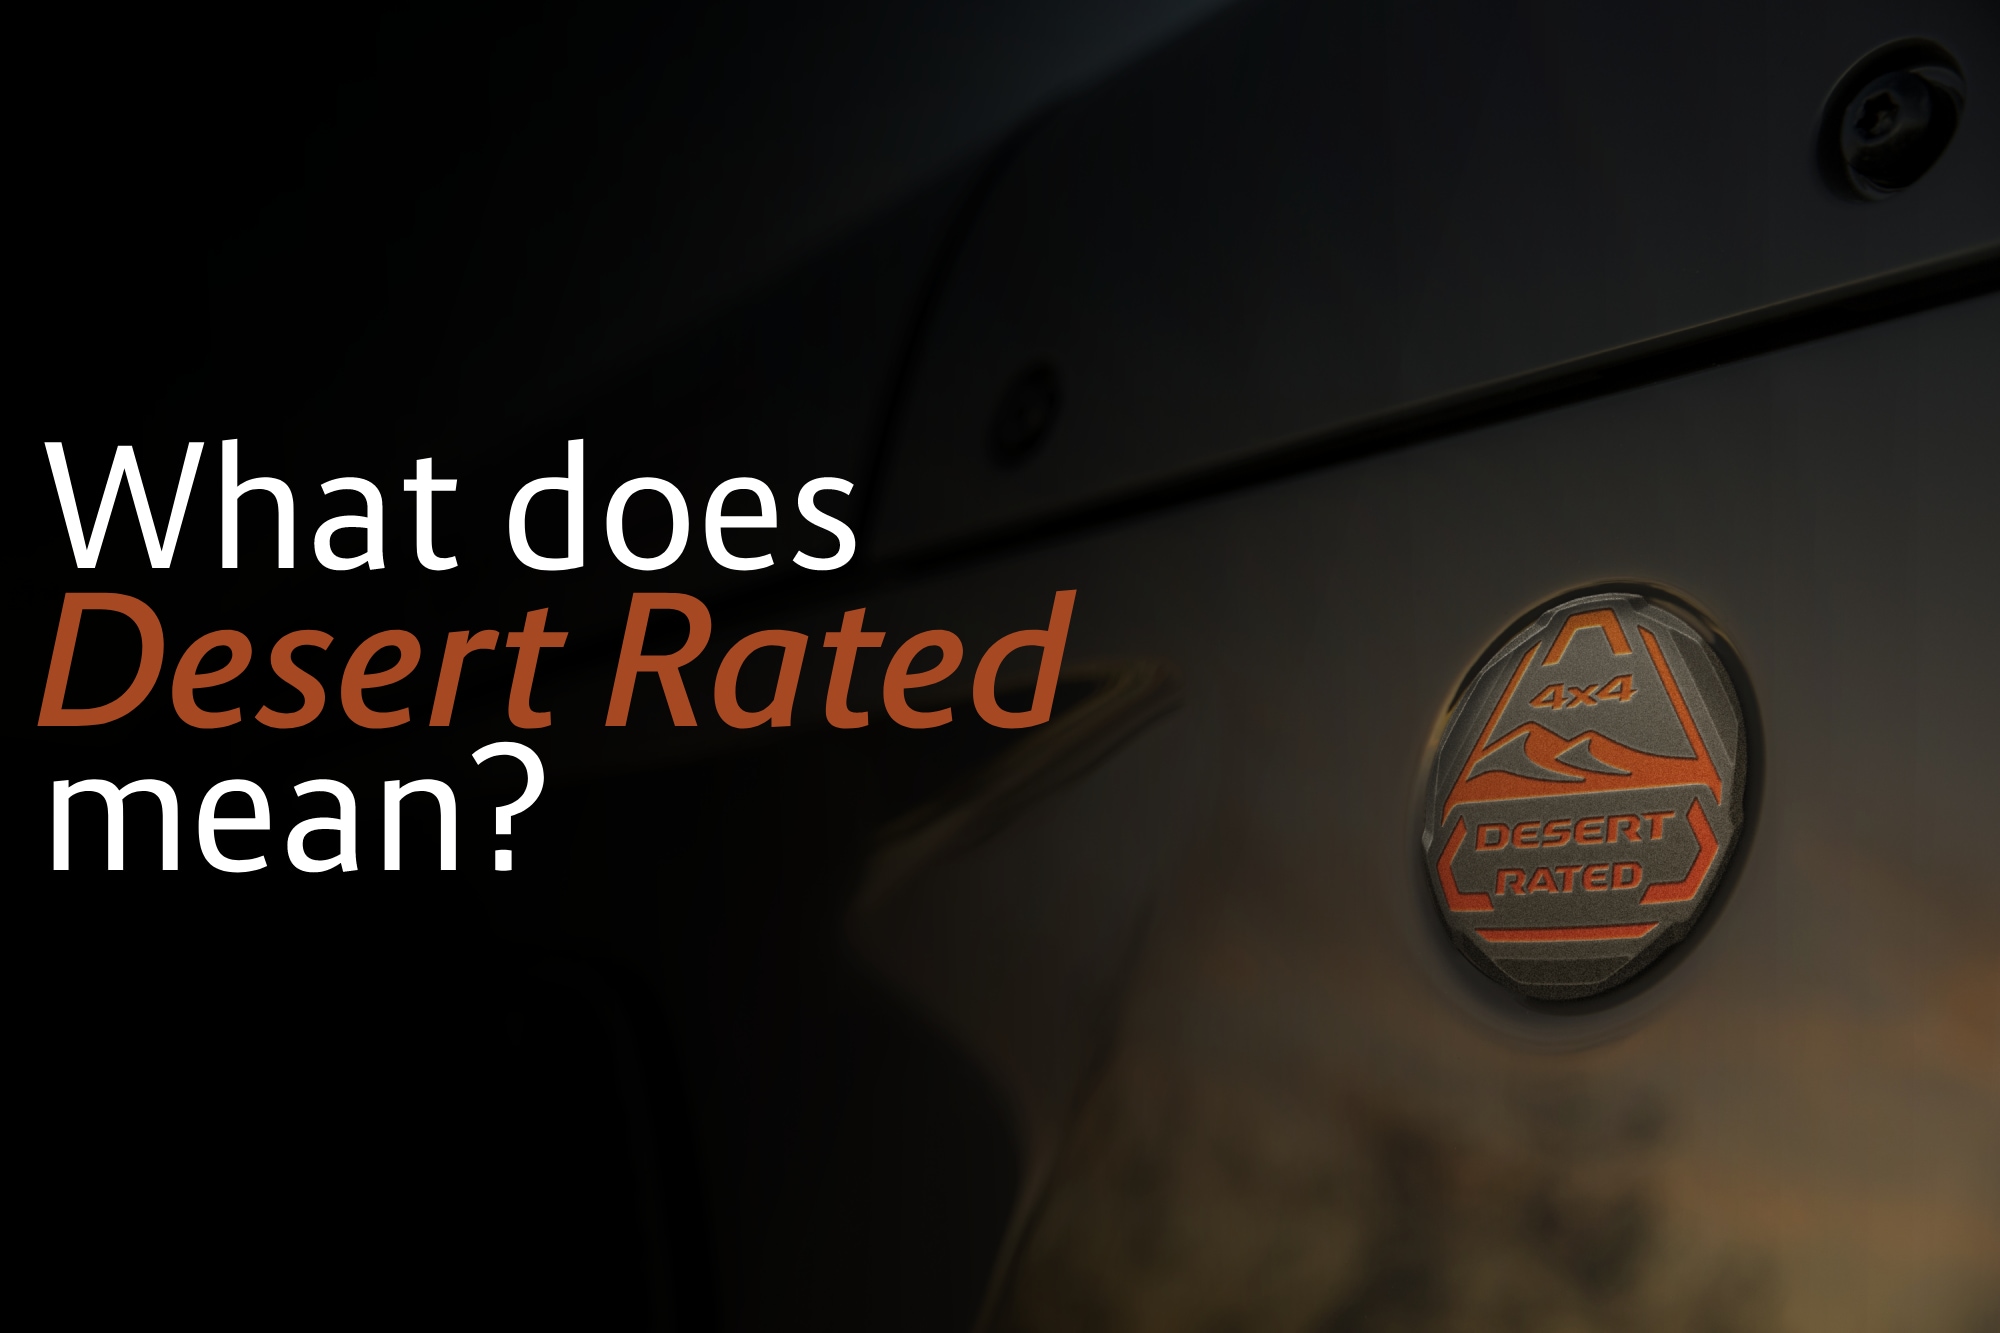 Desert Rated Jeep Badge with "What Does Desert Rated Mean?"